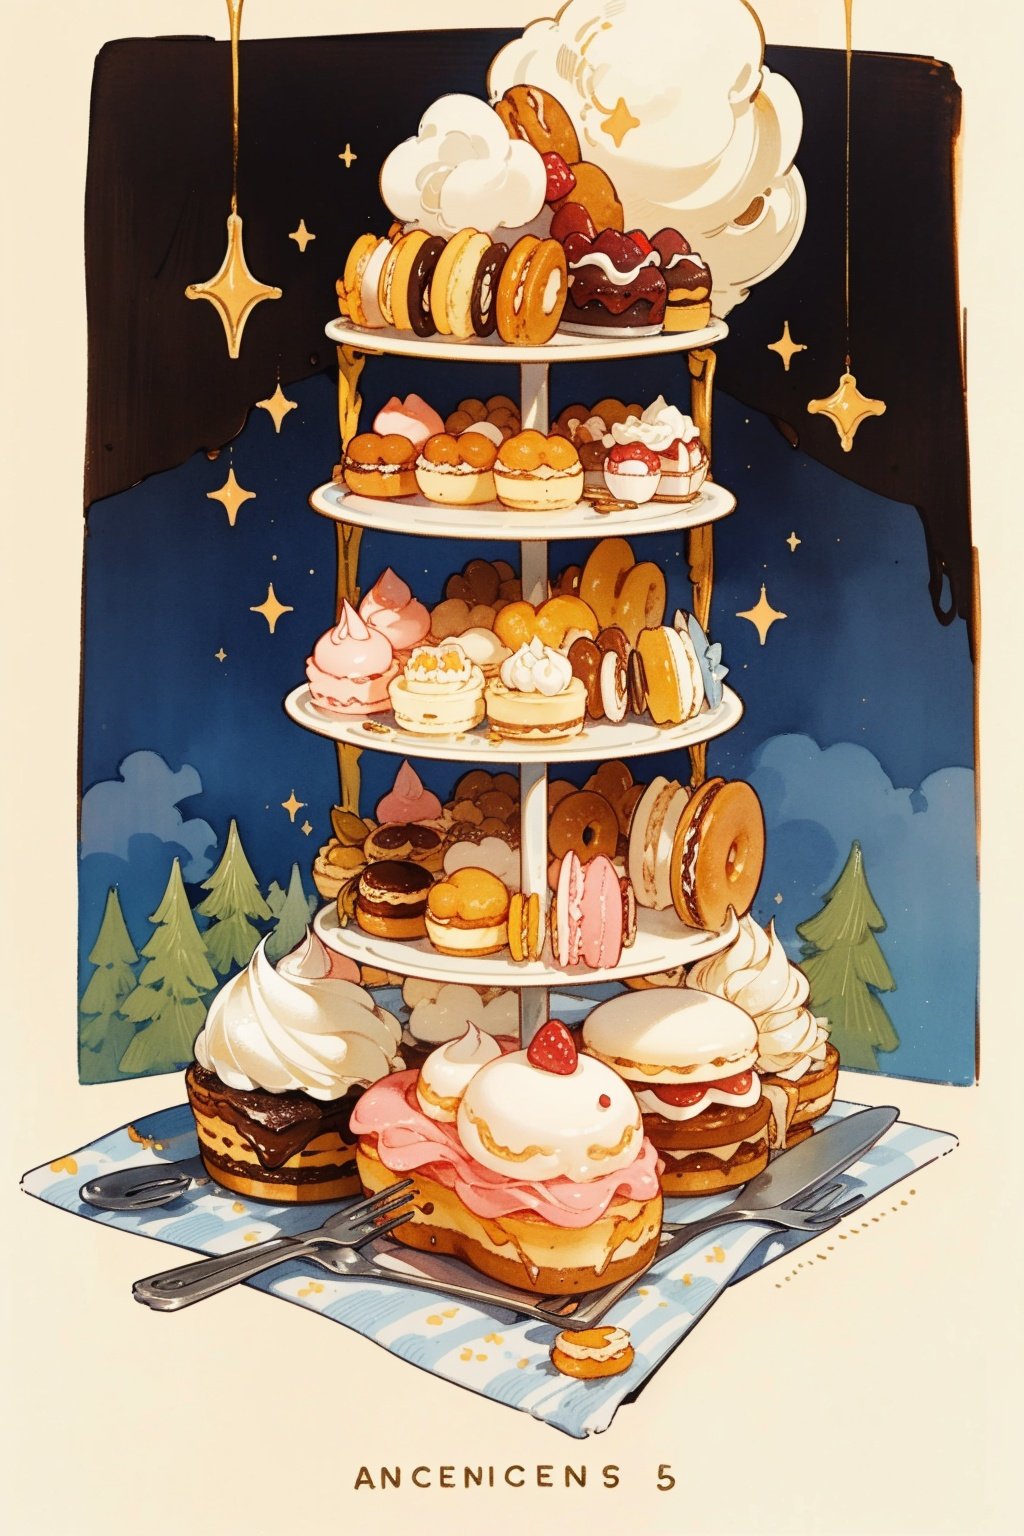 A watercolor painting filled with exquisite cake desserts, bread, doughnuts, macarons, exquisite beauty, visual feast, <lora:美食:0.8>, 